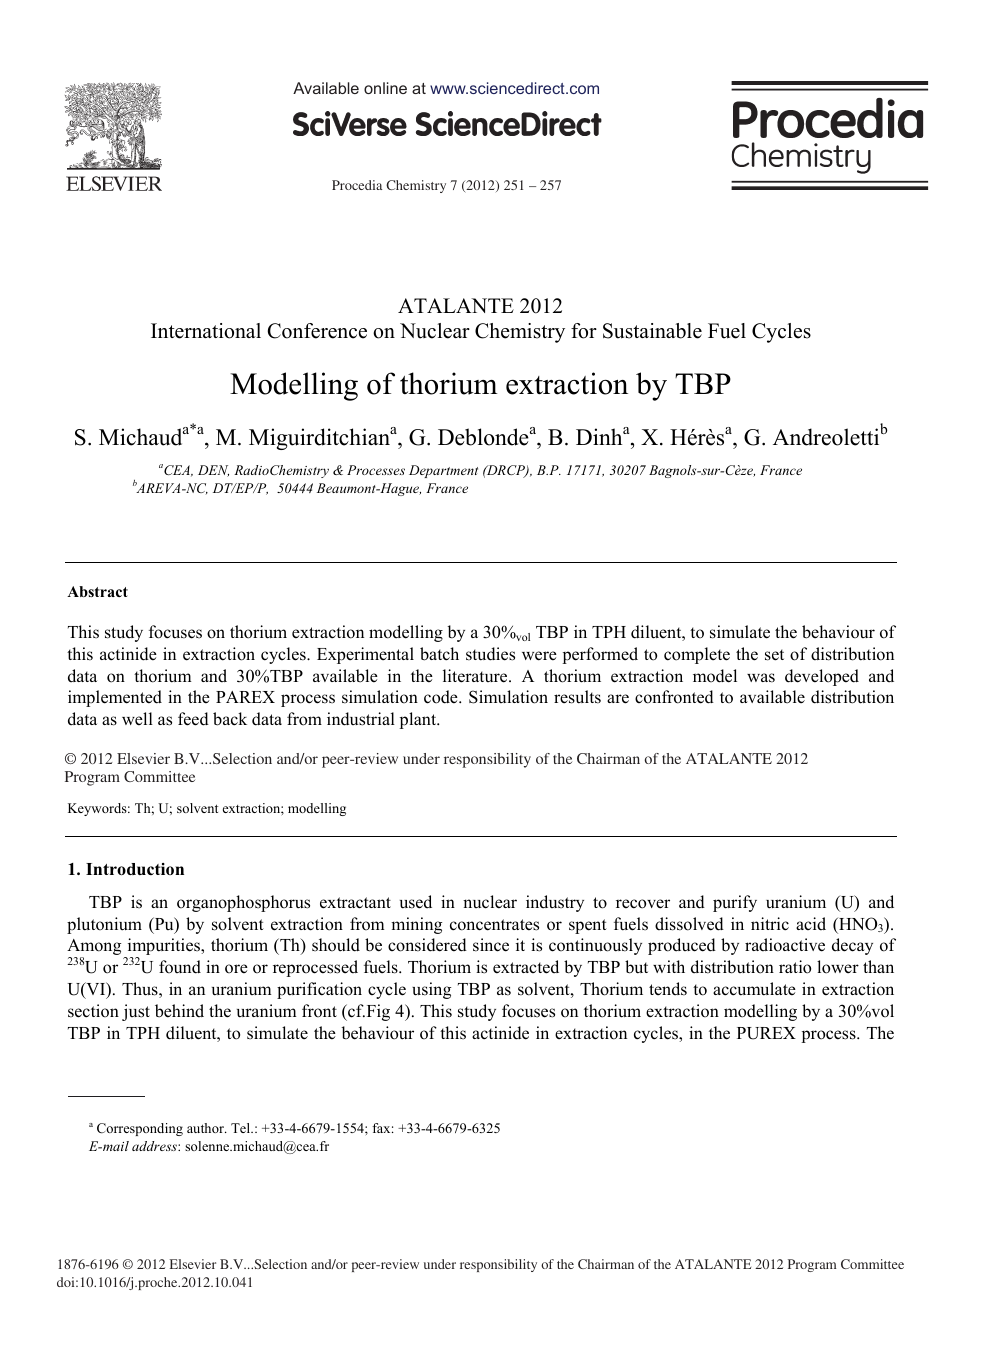 Modelling Of Thorium Extraction By Tbp Topic Of Research Paper In Chemical Sciences Download Scholarly Article Pdf And Read For Free On Cyberleninka Open Science Hub